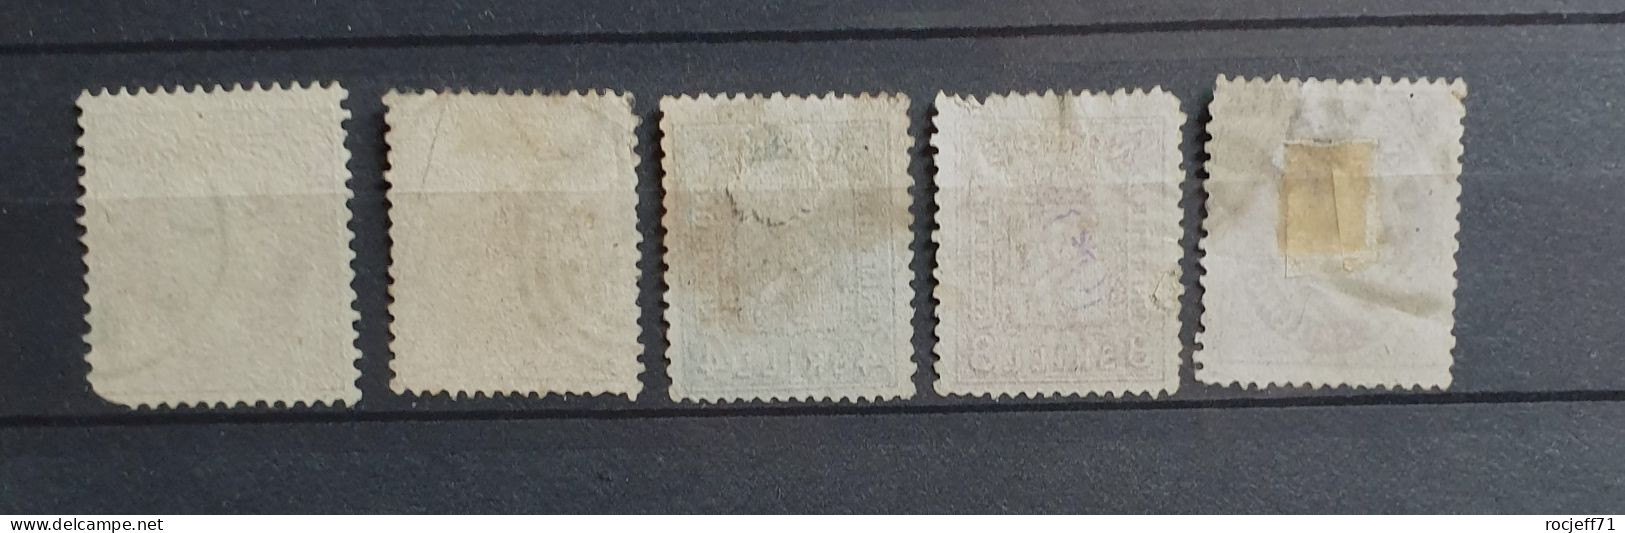 05 - 24 - Gino - Norvege Lot De Vieux Timbres - Norway Old Stamps - Value : 280 Euros - Used Stamps